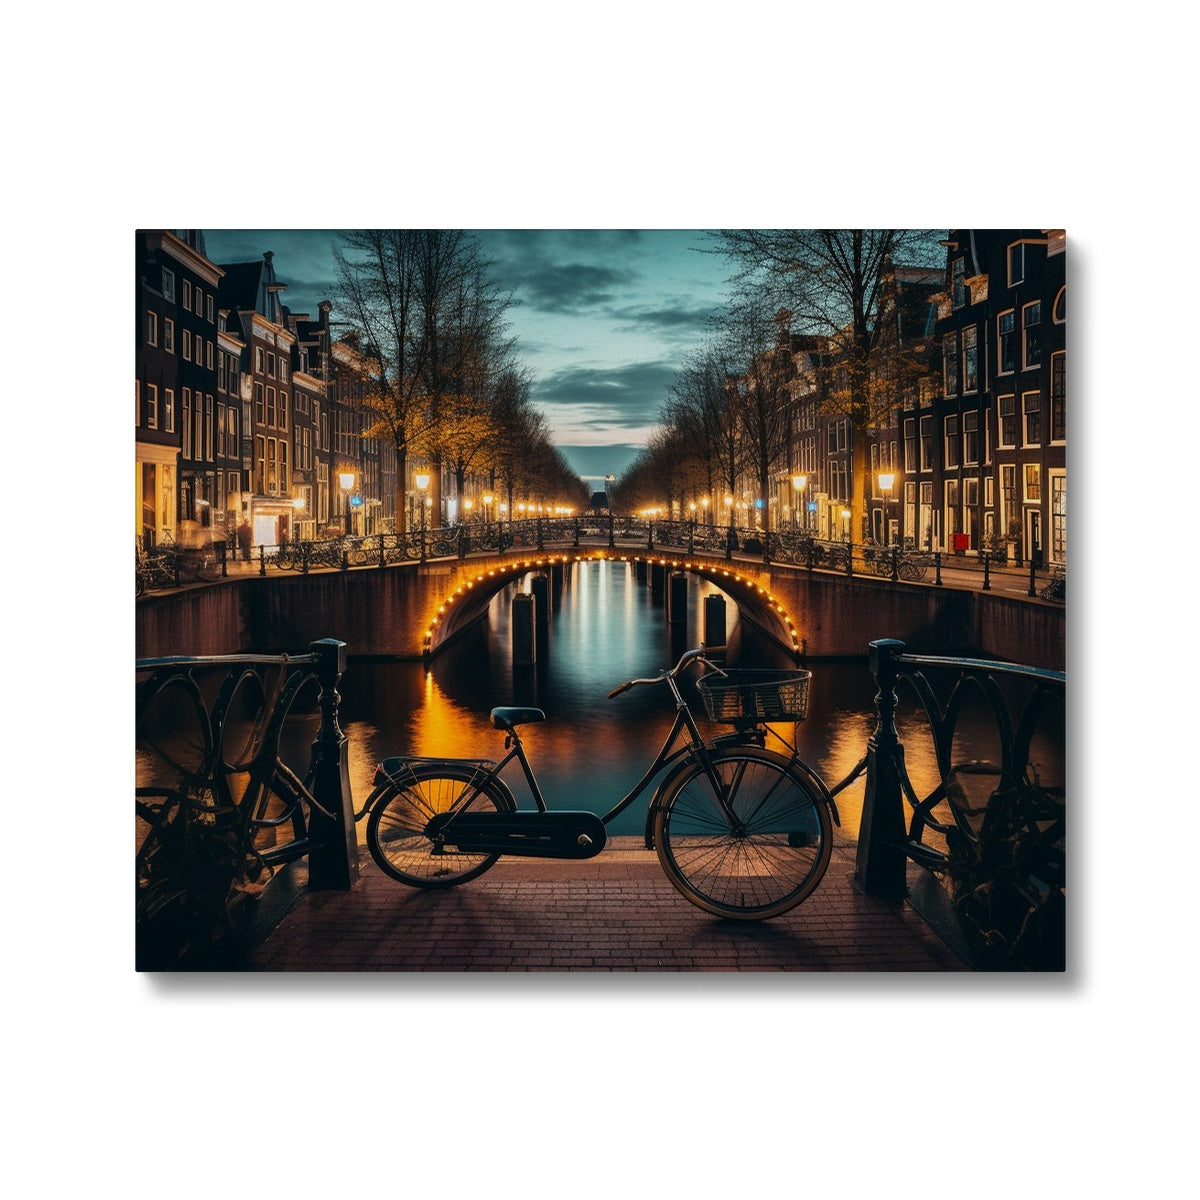 Canal Hopping At Dusk, Amsterdam Canvas